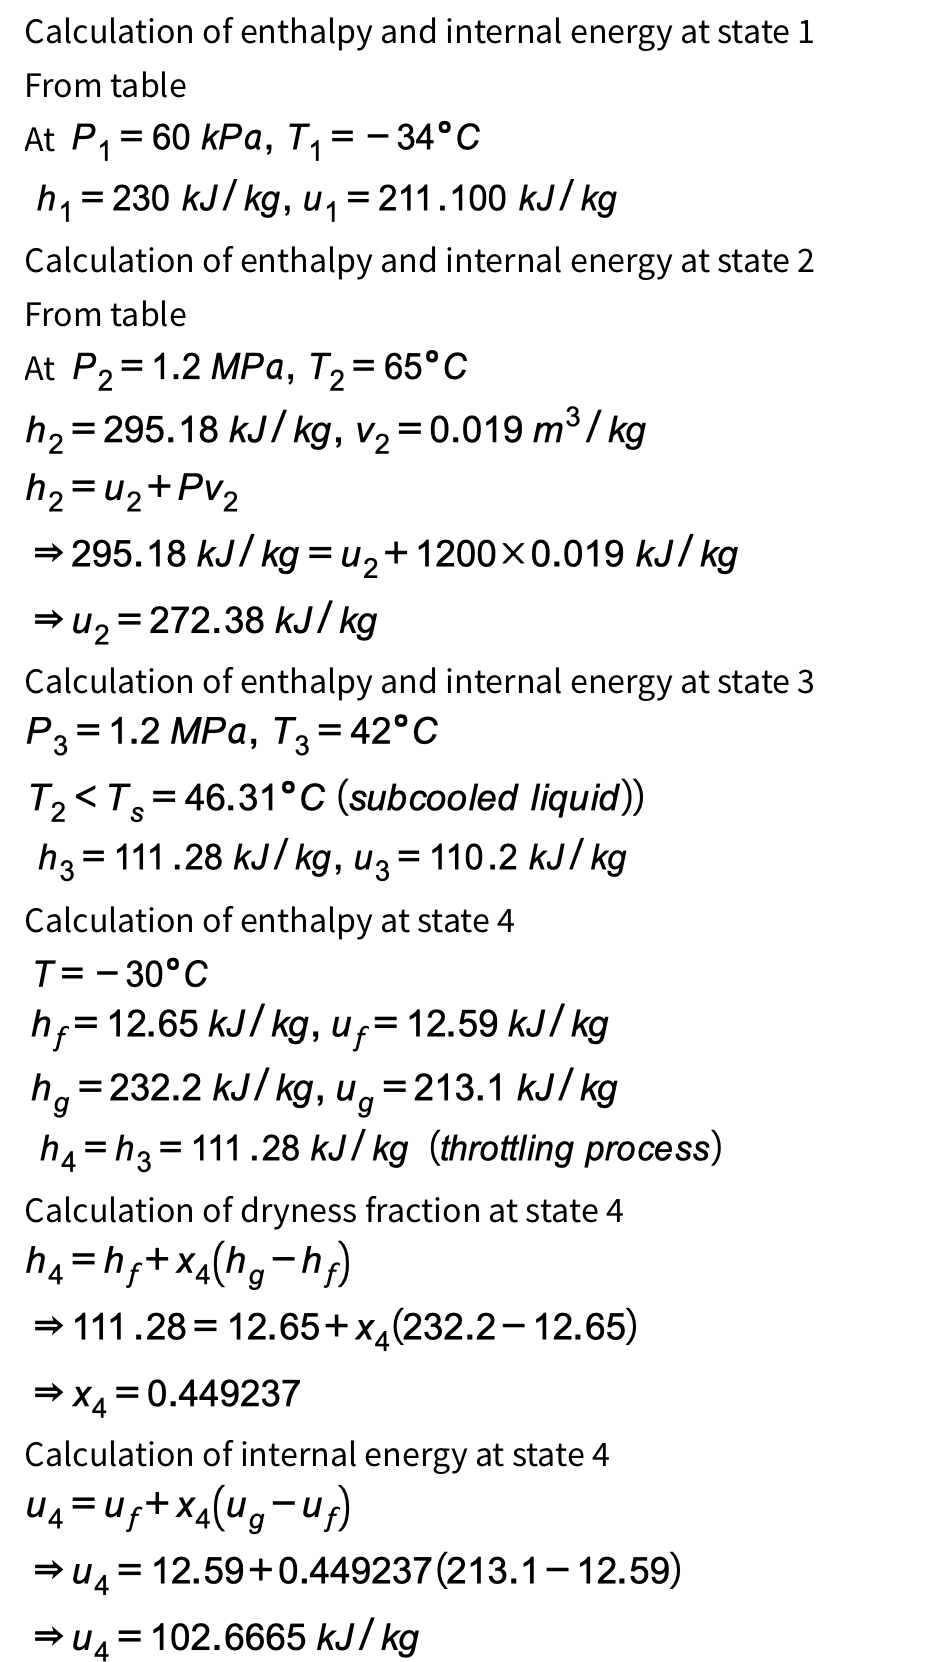 Calculation of enthalpy and internal energy at state 1
From table
At P₁ = 60 kPa, T₁
= - 34°C
h₁ =230 kJ/kg, u₁ = 211.100 kJ/kg
Calculation of enthalpy and internal energy at state 2
From table
At P2=1.2 MPa, T₂ = 65°C
h₂ = 295.18 kJ/kg, v₂ = 0.019 m³/kg
h₂ = u₂+Pv2
⇒ 295.18 kJ/kg = u2+1200×0.019 kJ/kg
=
➡u₂ 272.38 kJ/kg
Calculation of enthalpy and internal energy at state 3
P3= 1.2 MPa, T3 = 42°C
T₂<T=46.31°C (subcooled liquid))
=
h3 111.28 kJ/kg, u3 = 110.2 kJ/kg
Calculation of enthalpy at state 4
T= -30°C
h = 12.65 kJ/kg, u₁ = 12.59 kJ/kg
hg=232.2 kJ/kg, ug = 213.1 kJ/kg
=
=
h4 h3 111.28 kJ/kg (throttling process)
Calculation of dryness fraction at state 4
h₁ = h₂+x4 (hg-h₂)
⇒ 111.28
12.65+x(232.2-12.65)
⇒ x4 = 0.449237
Calculation of internal energy at state 4
U₁₁ = U₁ + × 4 (ug-u₁)
= 12.59+0.449237 (213.1-12.59)
⇒u4=102.6665 kJ/kg